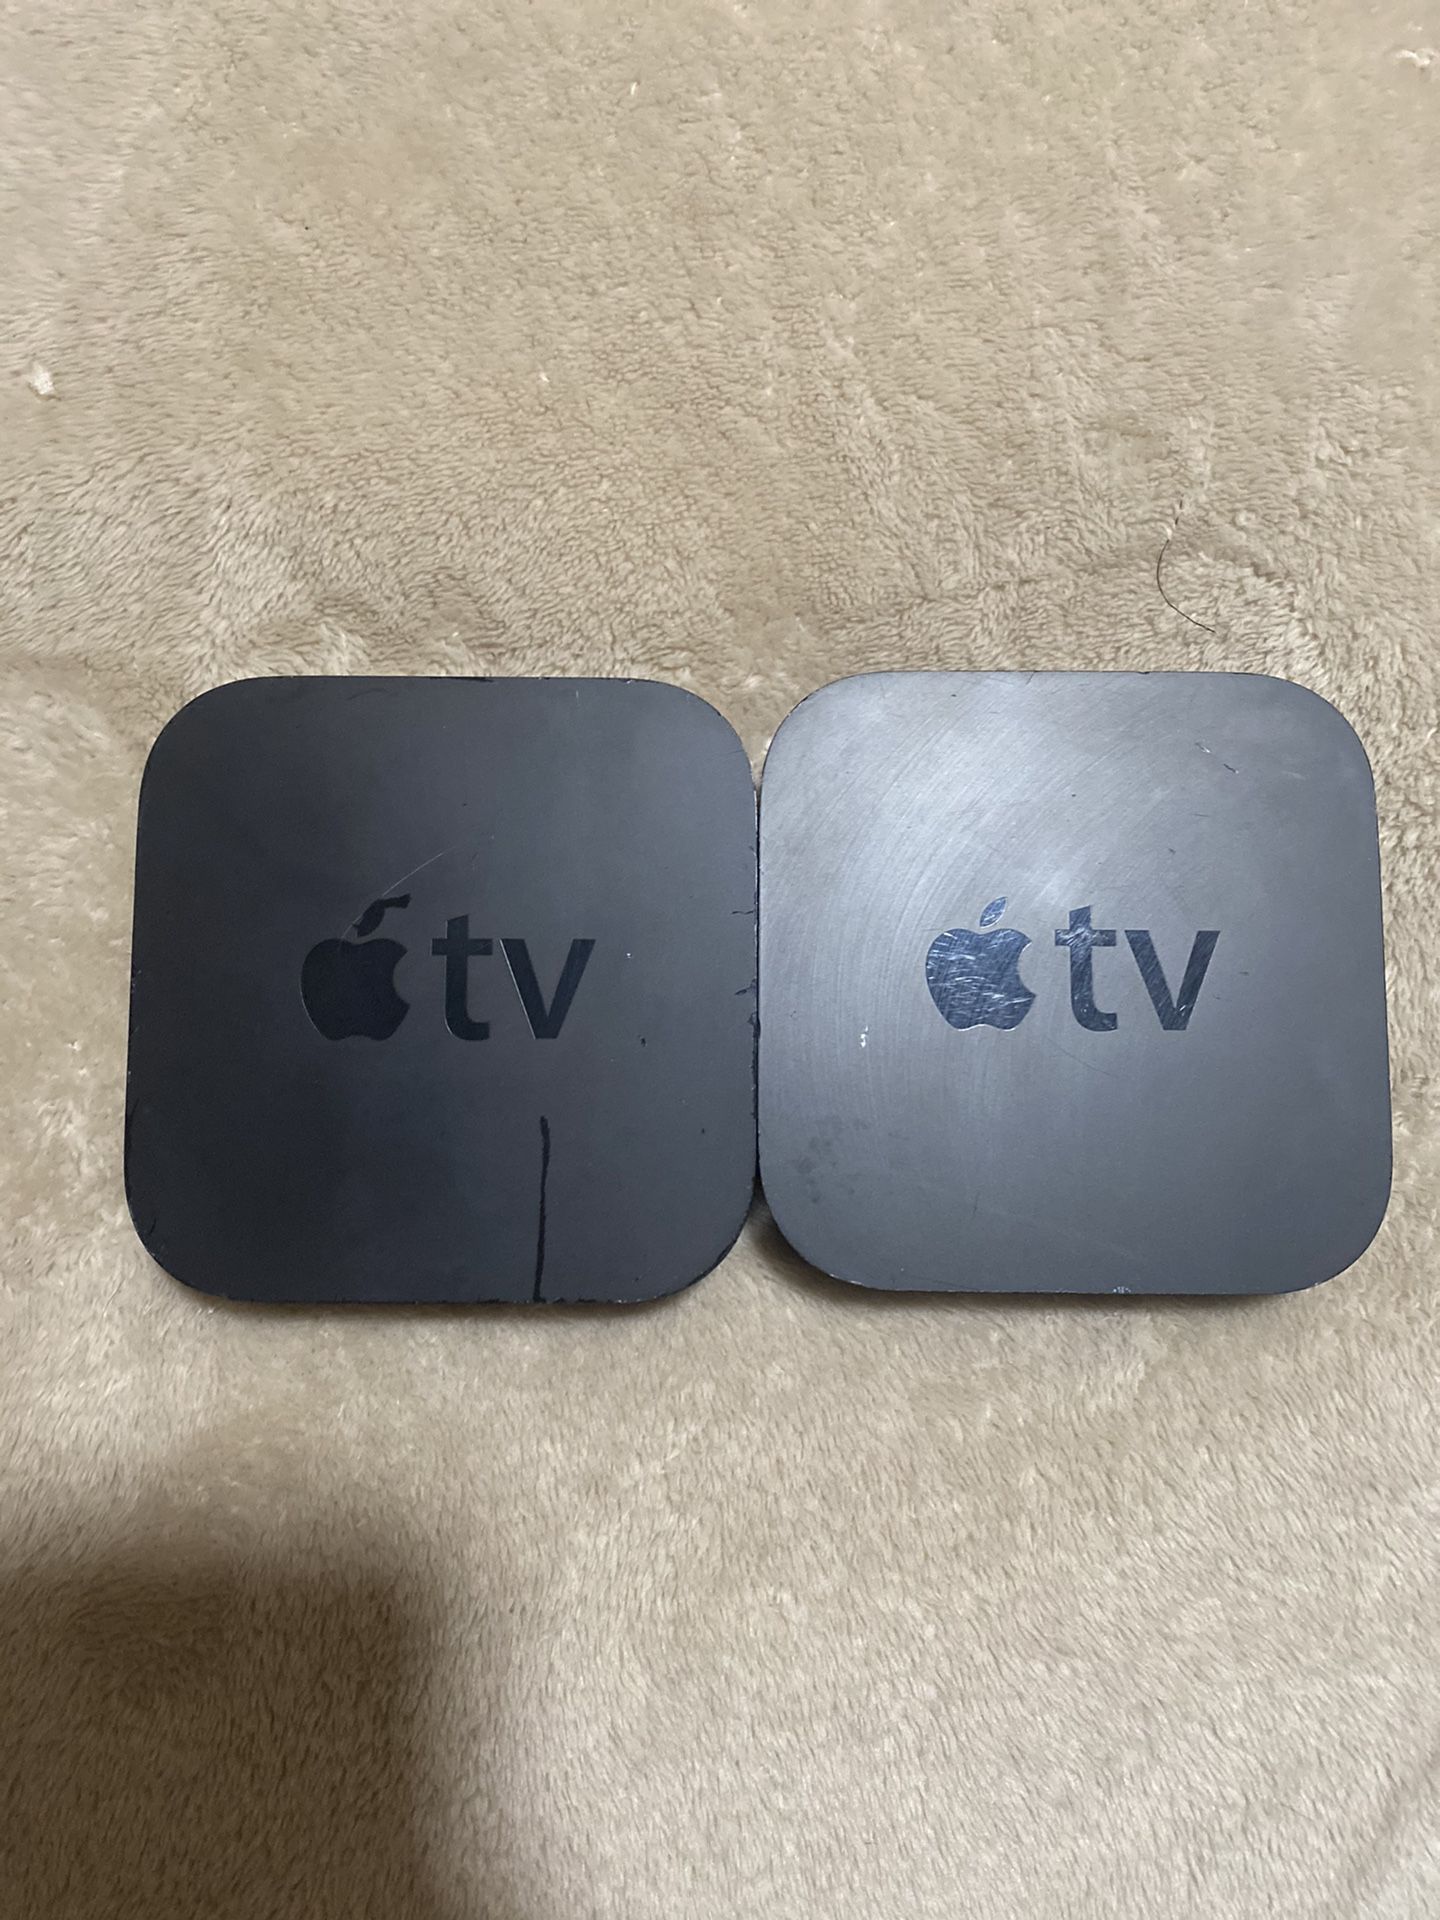 Two Apple TV